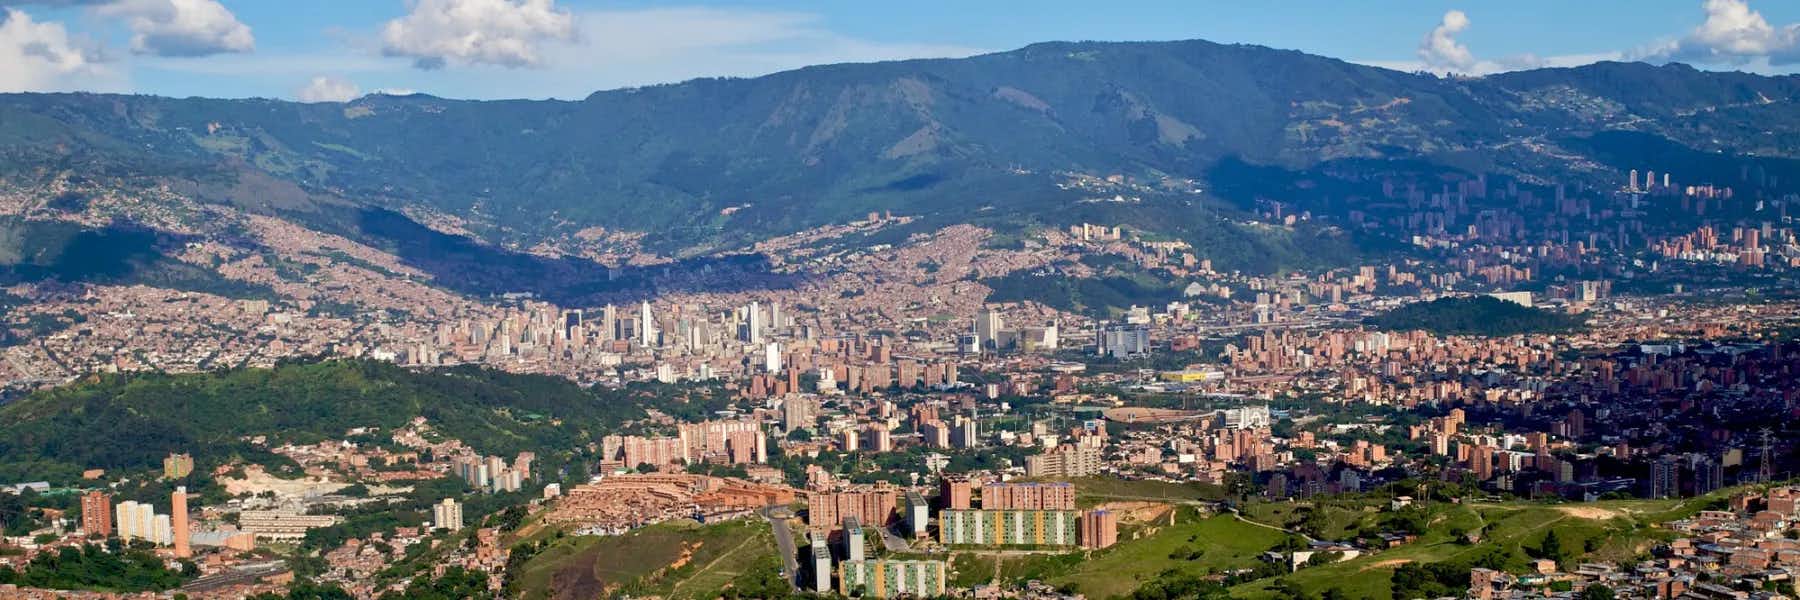 Medellin or Manizales — Comparing Colombia’s Lush Expat Mountain Cities